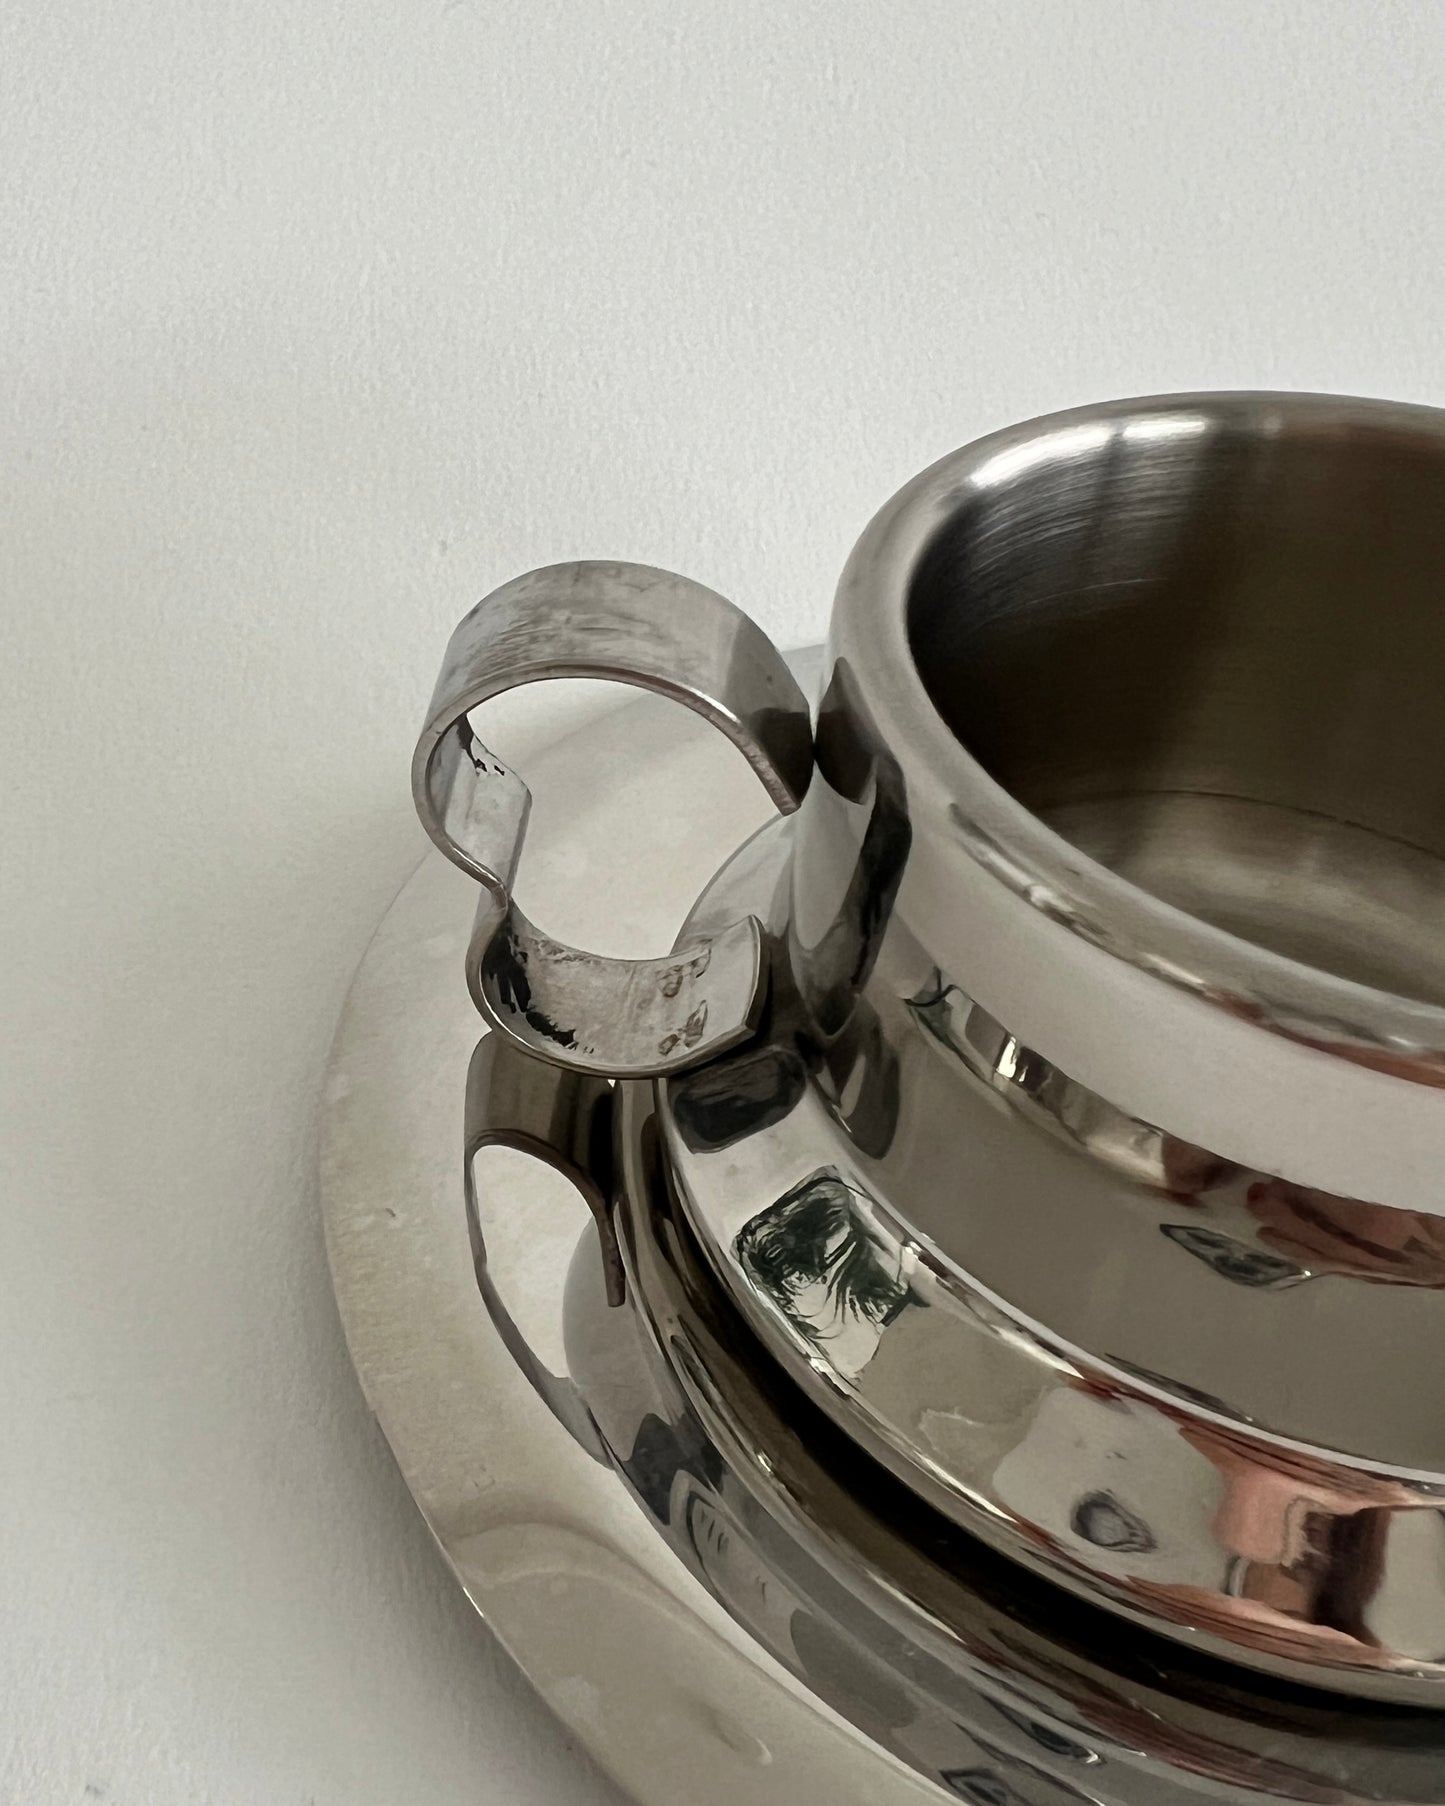 Stainless Steel Espresso Cup